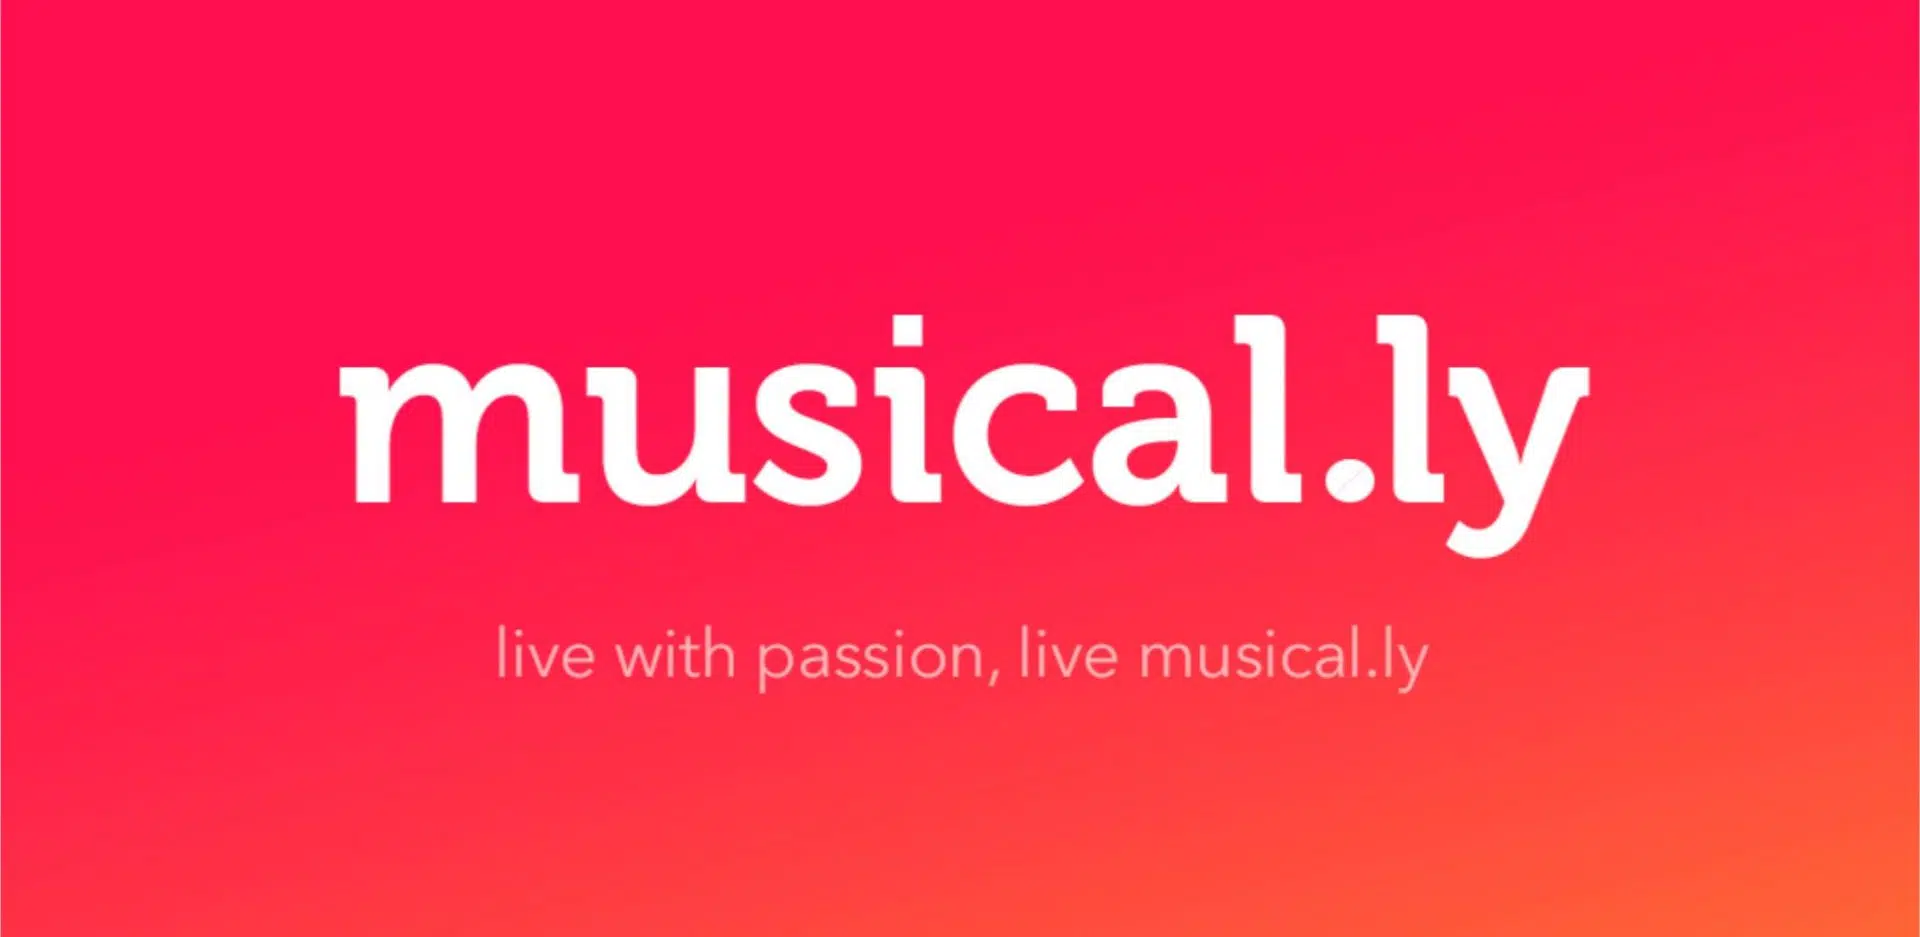 Musical.ly reportedly partners with Apple Music